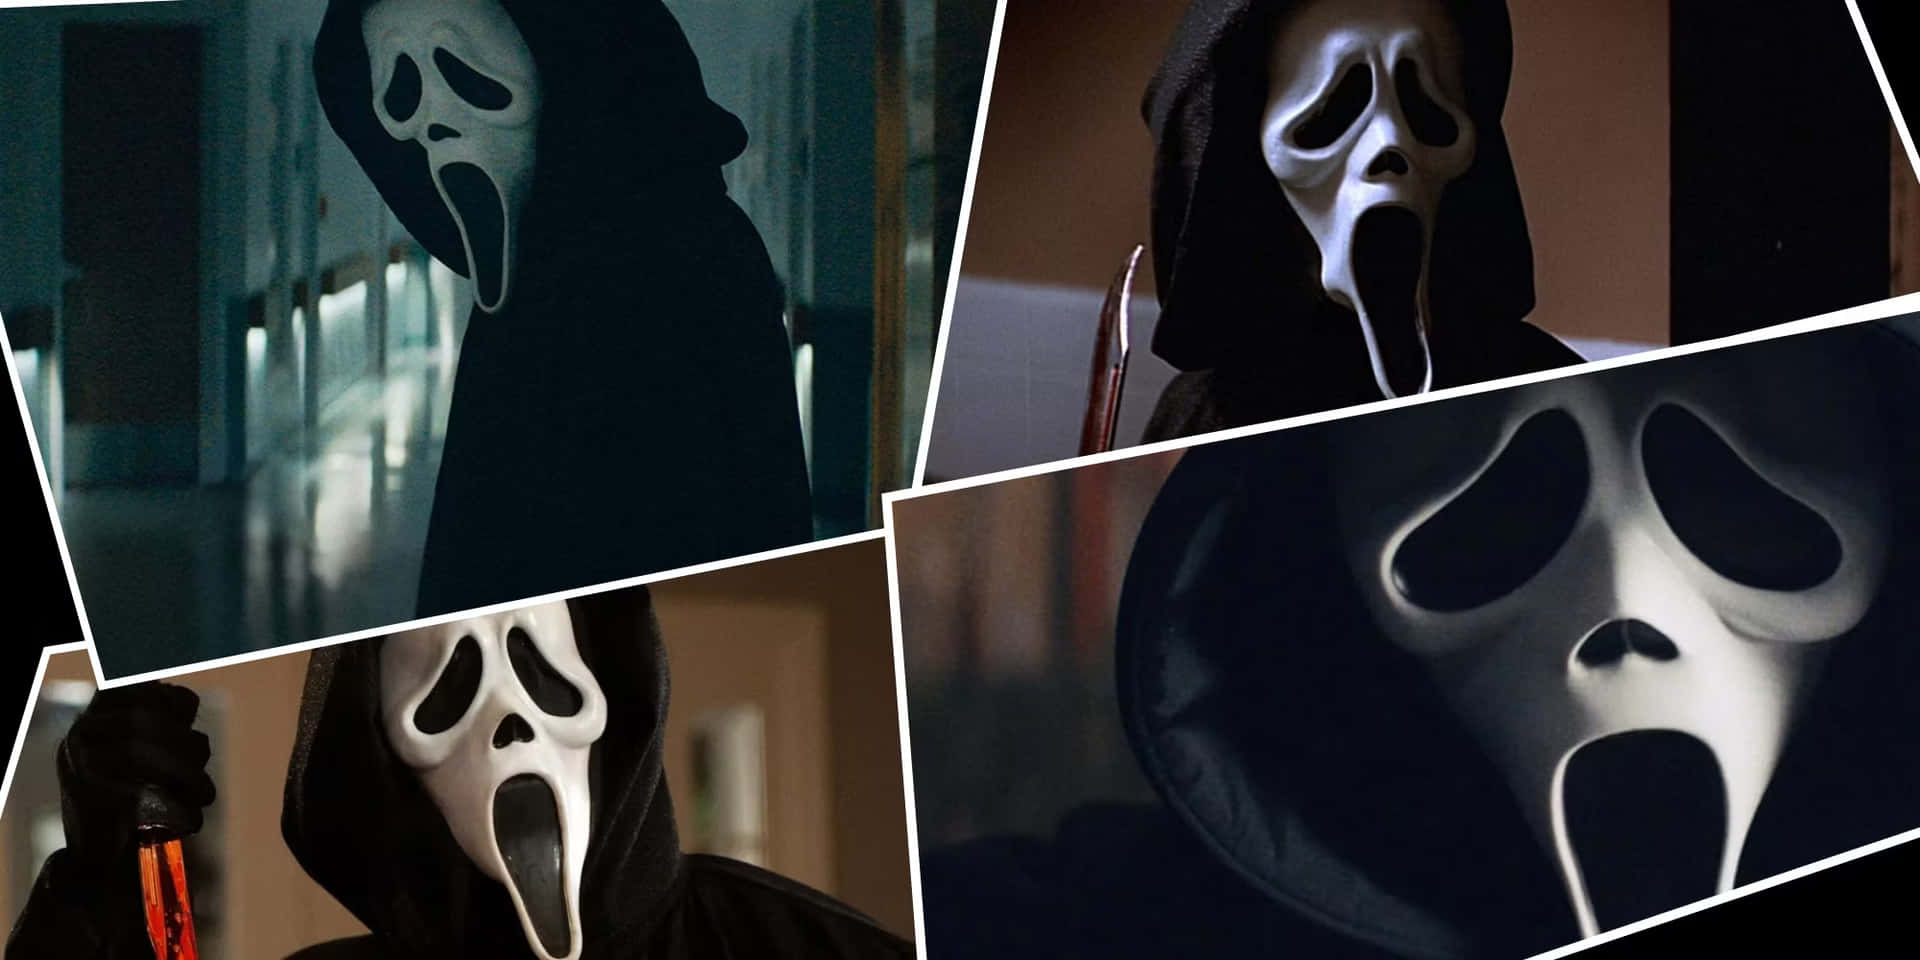 Scream Masks In Different Pictures